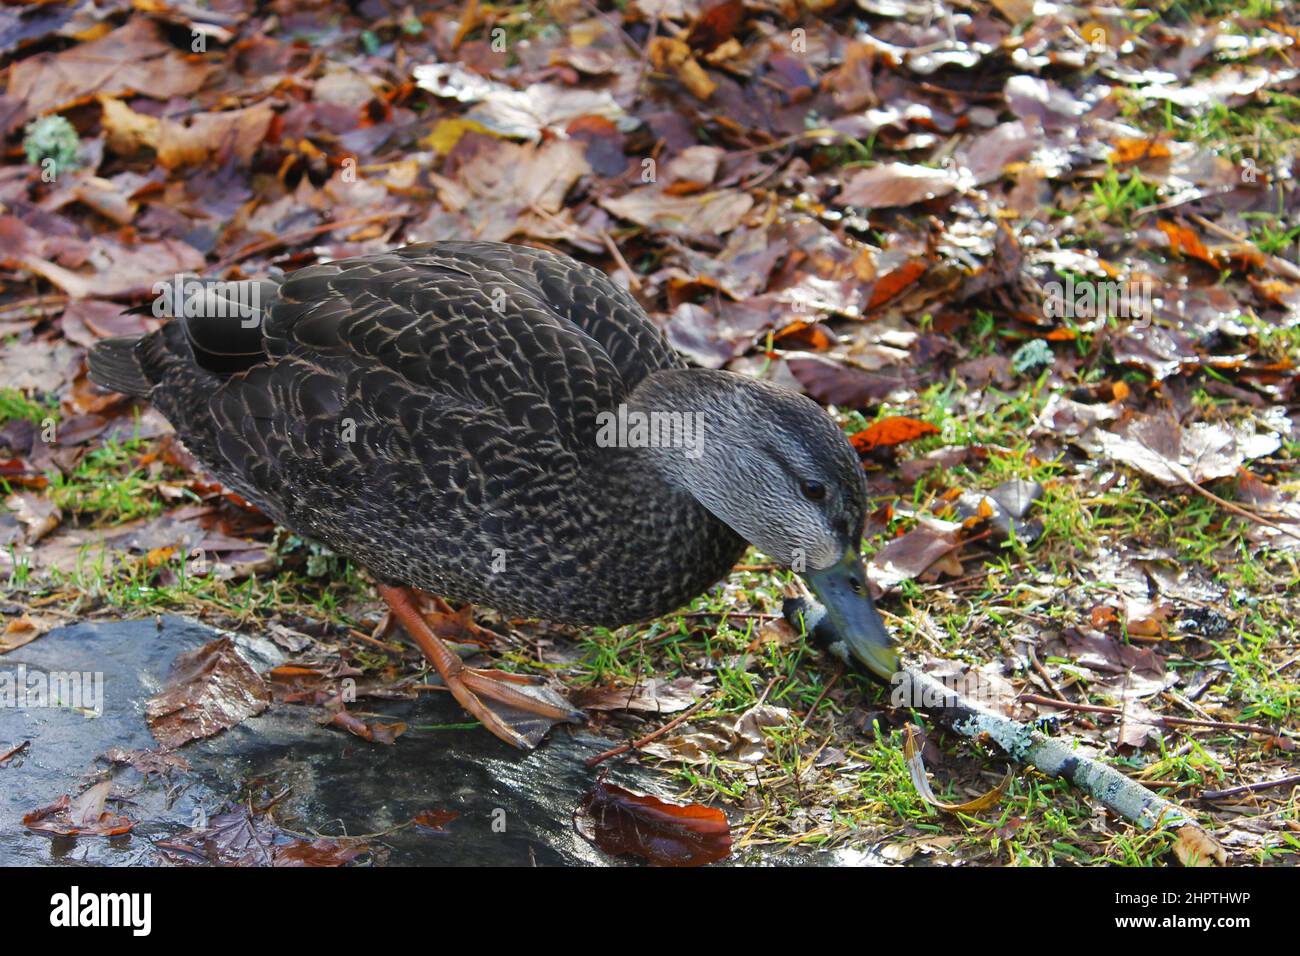 A duck in the grass among the fallen autumn leaves. Stock Photo